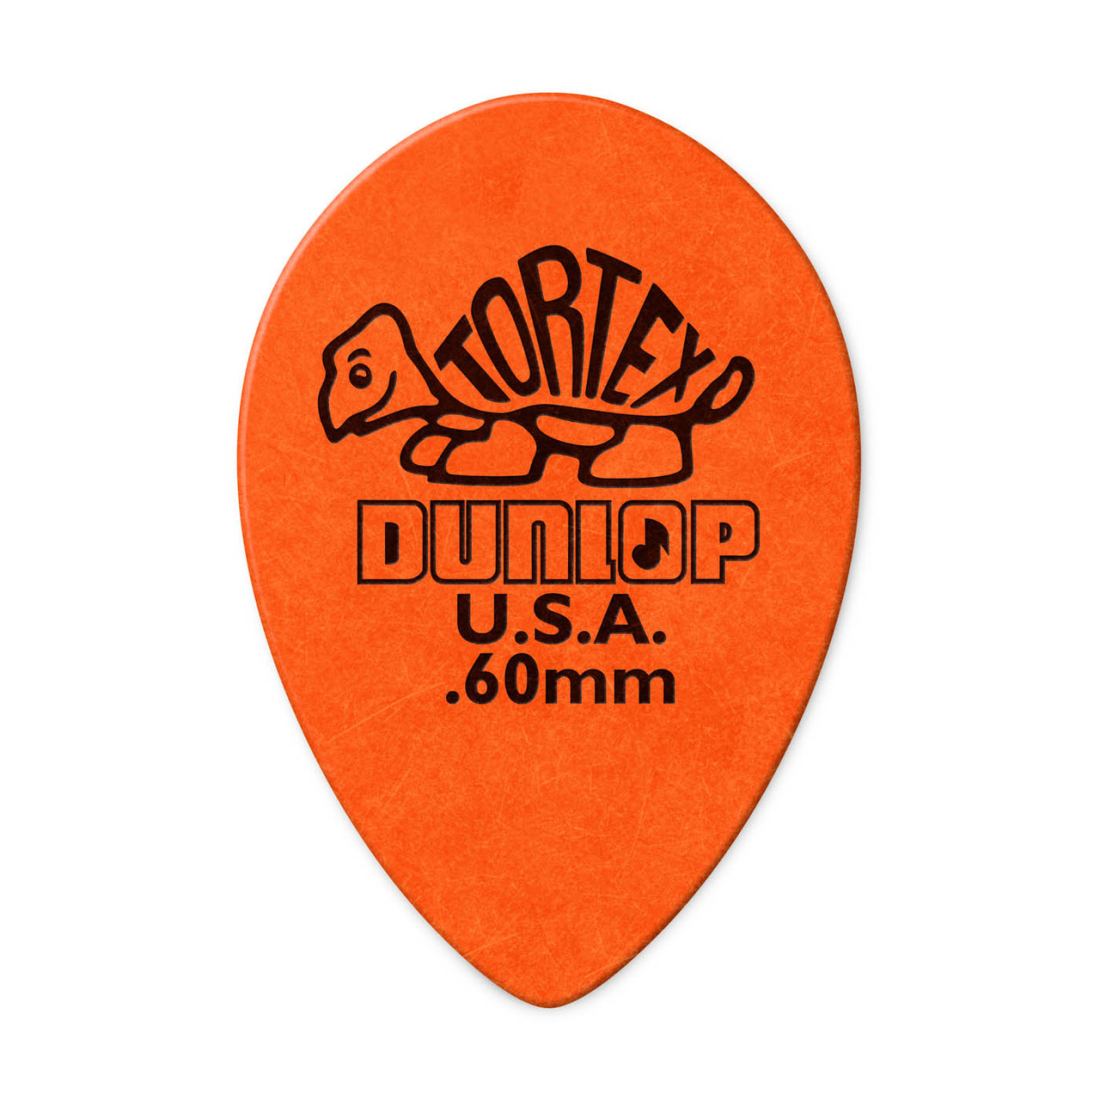 Tortex Small Teardrop Players Pack (36 Pack) - .60mm